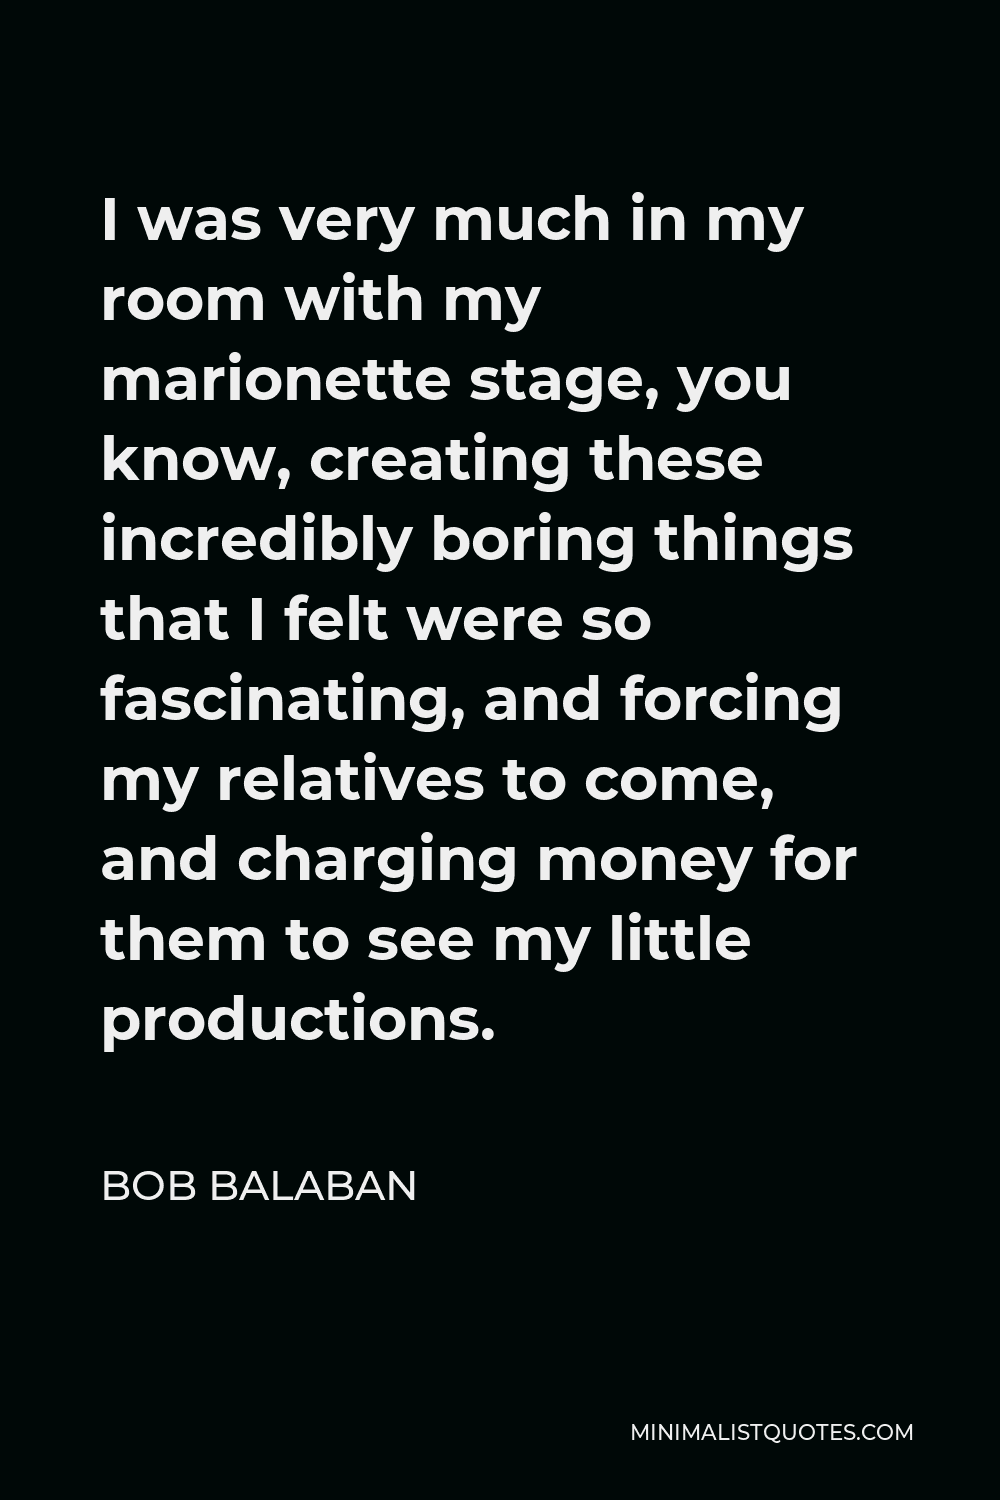 Bob Balaban Quote - I was very much in my room with my marionette stage, you know, creating these incredibly boring things that I felt were so fascinating, and forcing my relatives to come, and charging money for them to see my little productions.